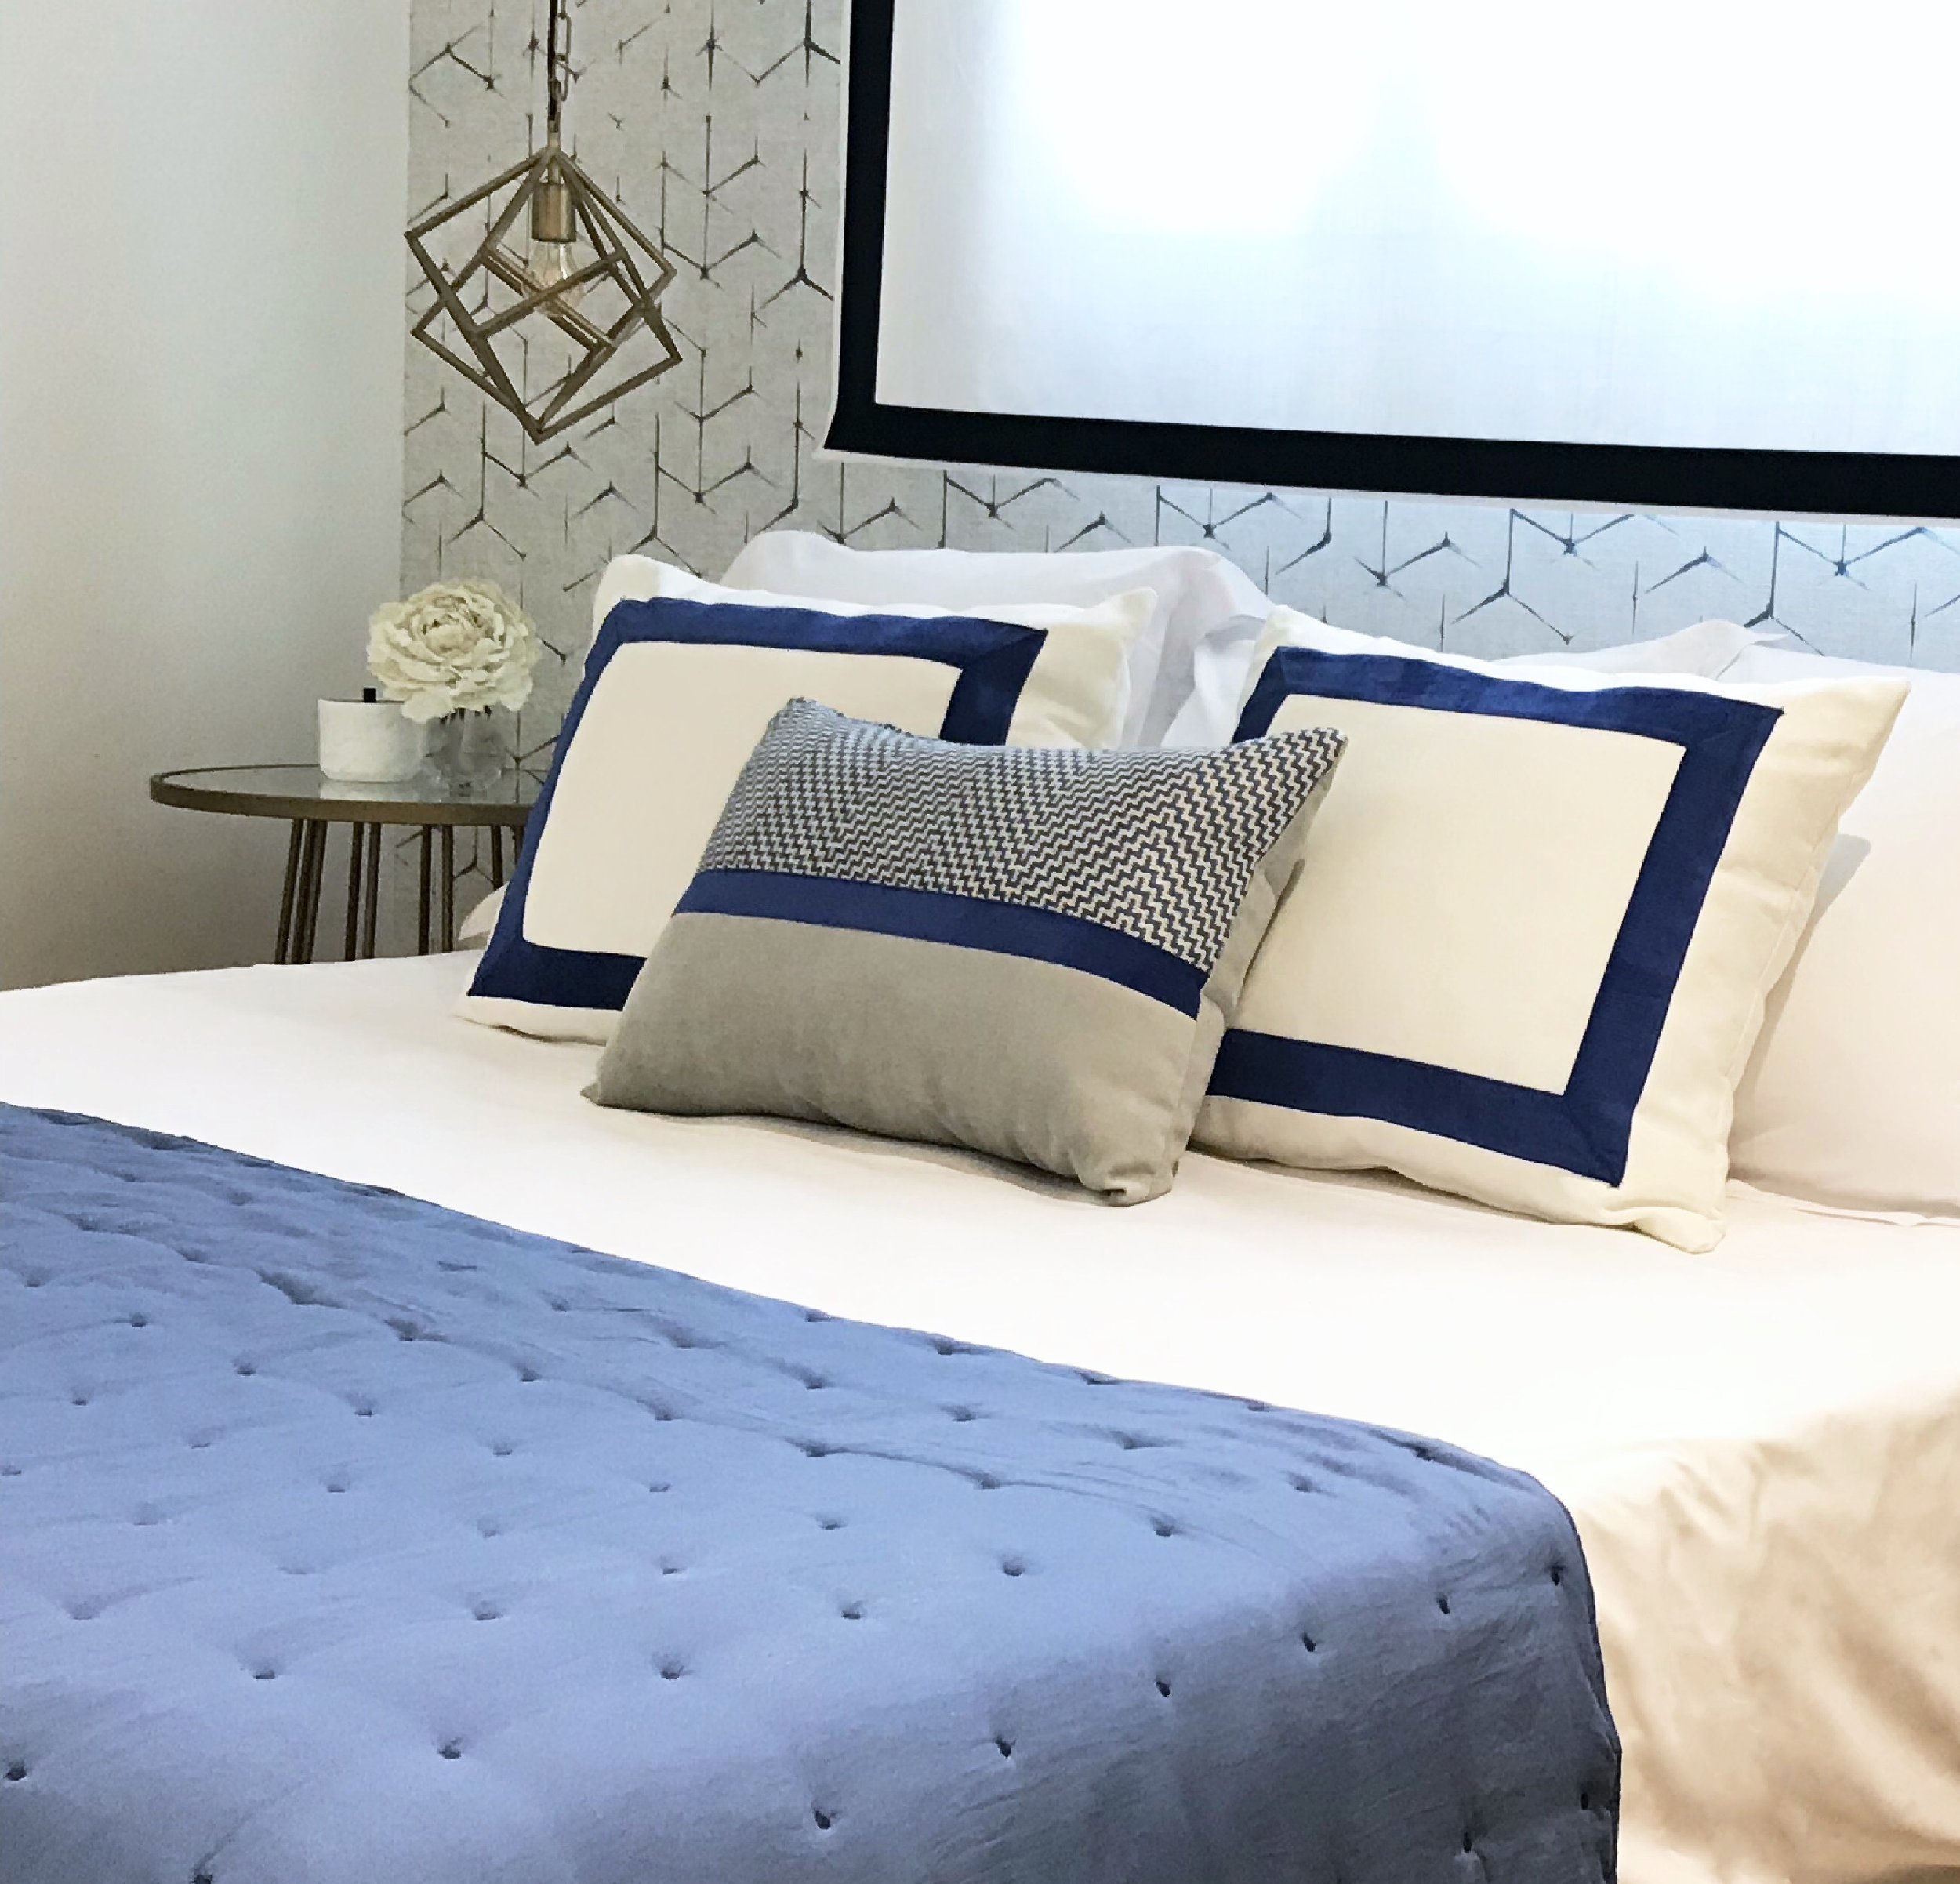 Image of professionally styled bed in blues and off white tones with graphic wallpaper and hanging gold, dynamic light.